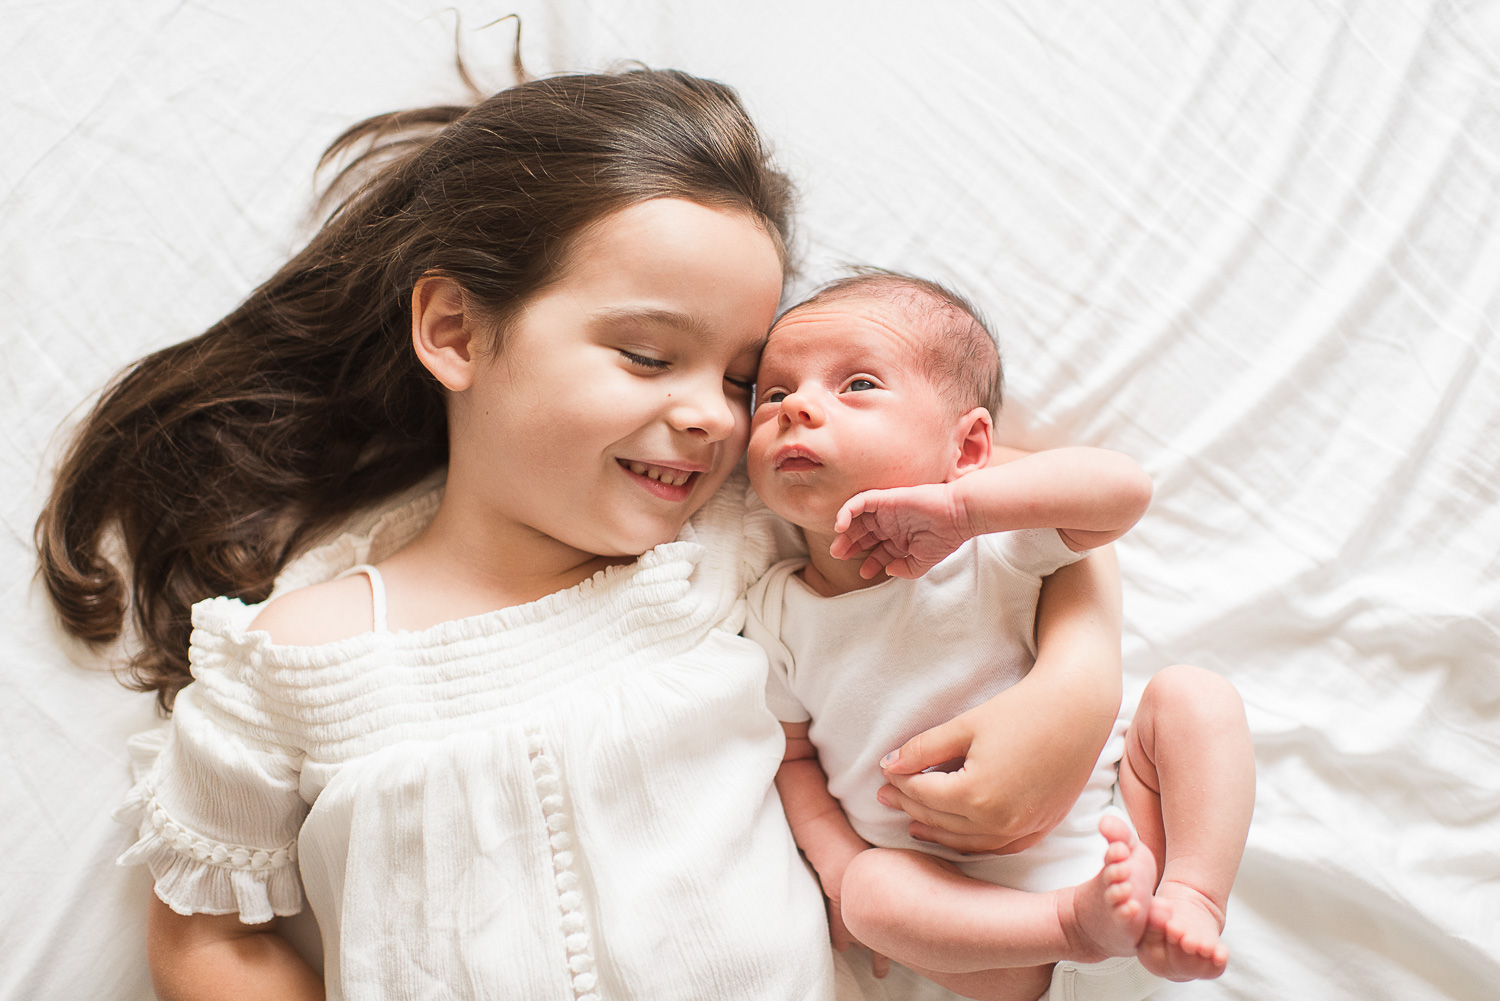 Lifestyle Photography | In-Home Session | Newborn Photography